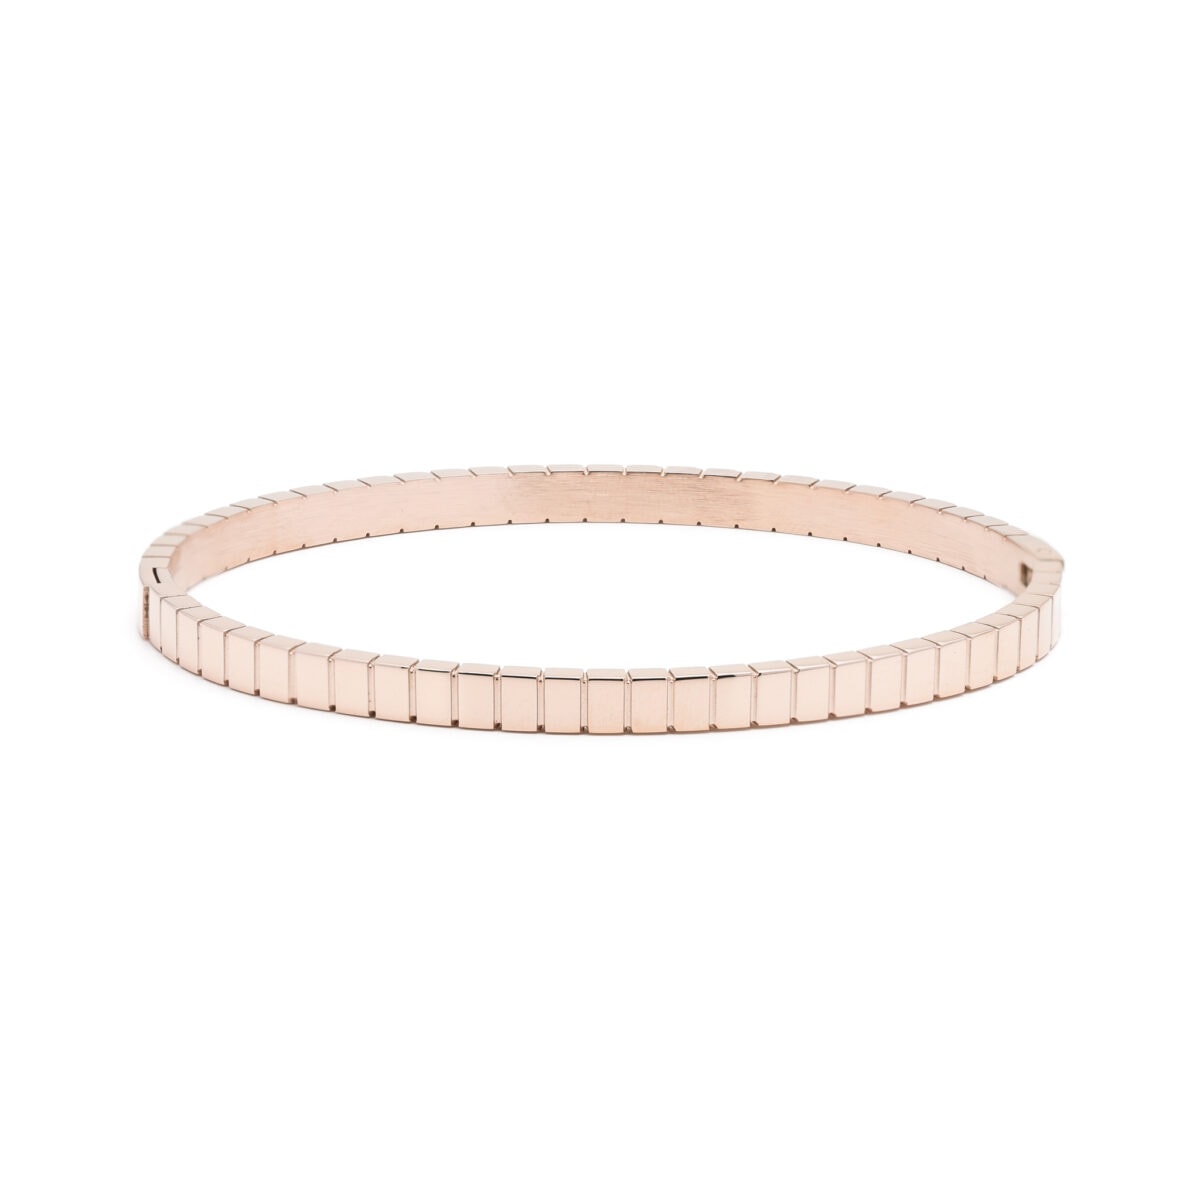 https://m.clubbella.co/product/ice-cube-rose-gold-bangle/ Ice Cube Bangle Rose Gold (3)